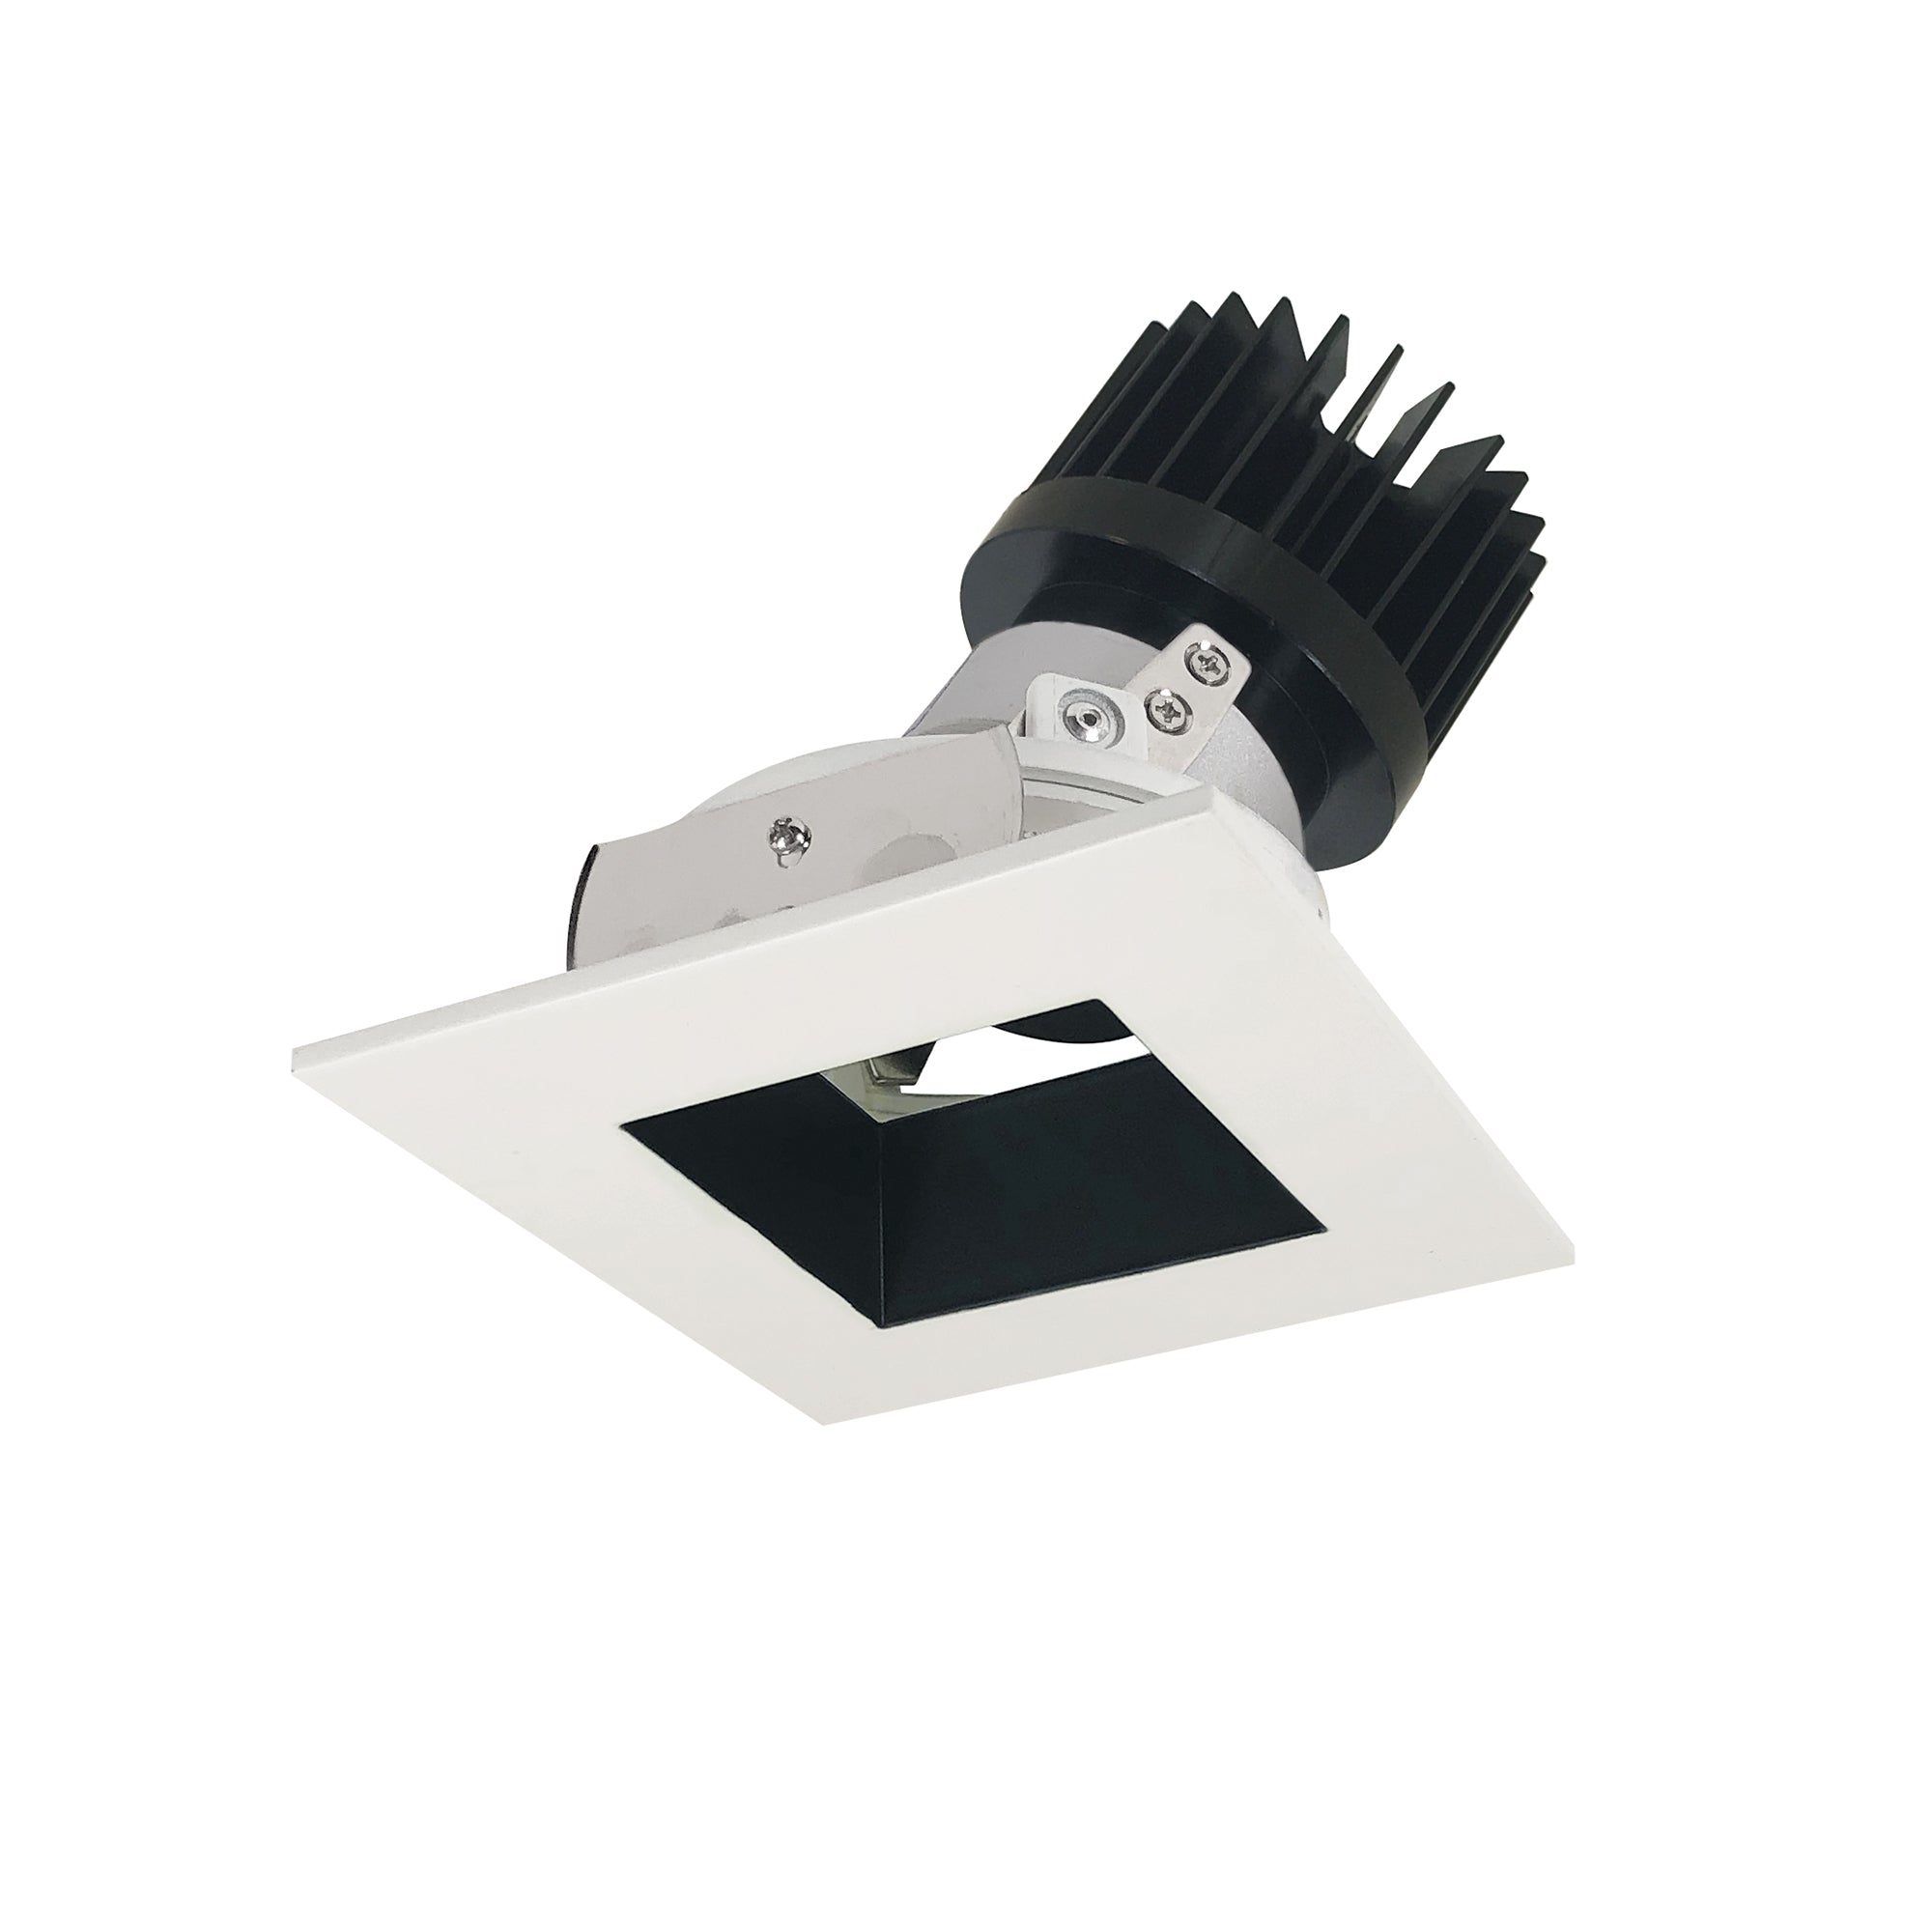 Nora Lighting NIO-4SDSQ40XBW/HL 4" Iolite LED Square Adjustable Reflector With Square Aperture, 1500lm/2000lm (varies by housing), 4000K - Black Reflector / White Flange